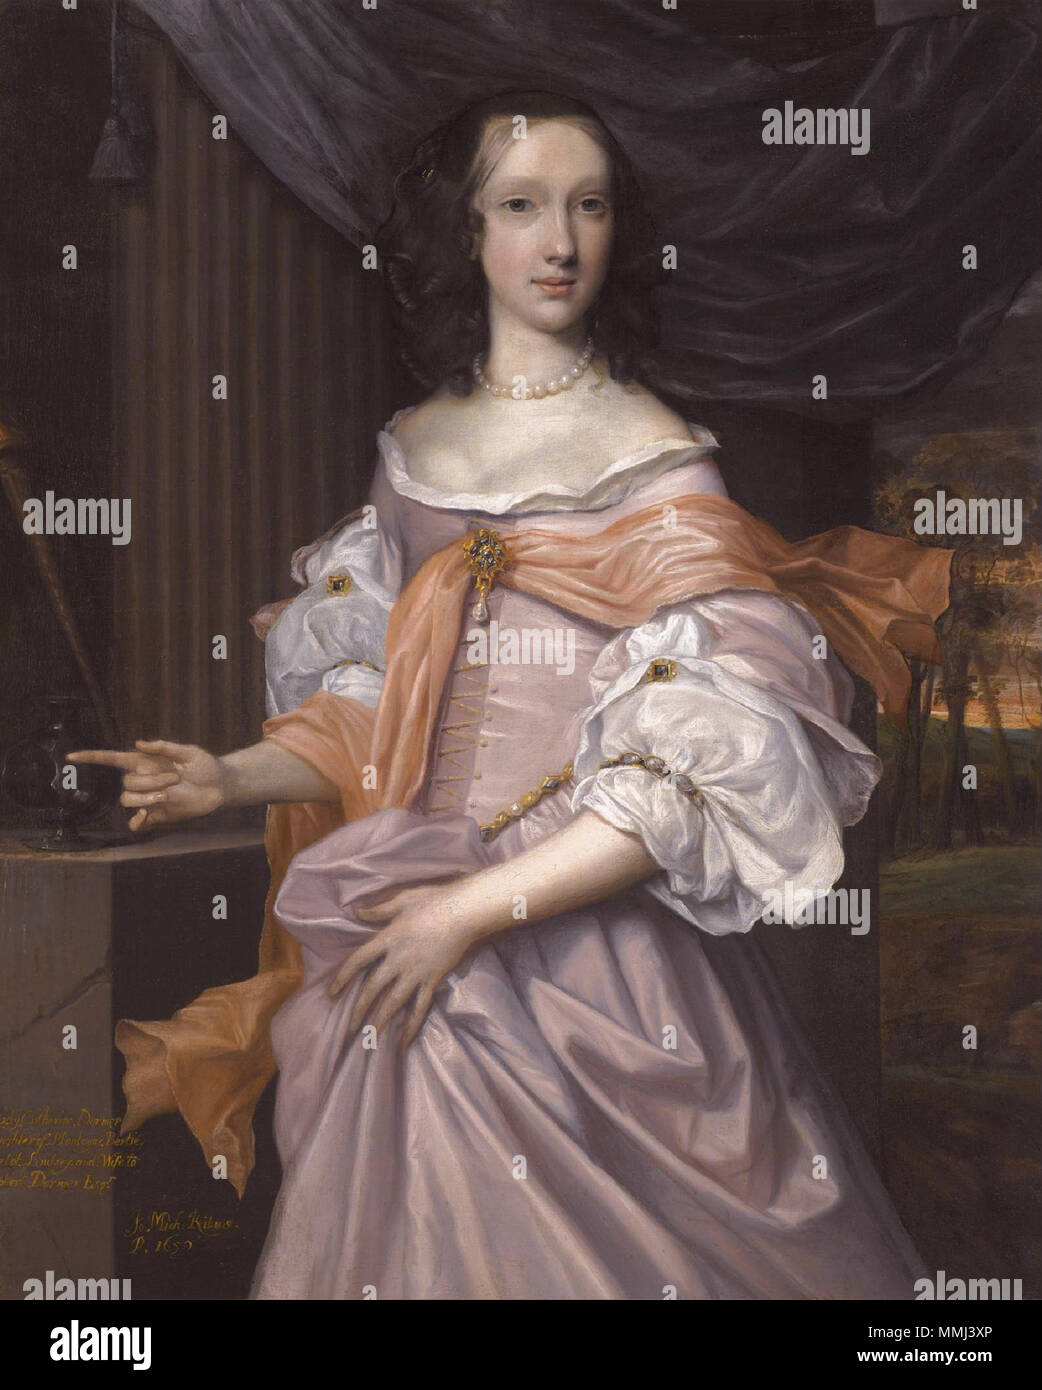 .  English: Catherine Dormer, daughter of Montagu Bertie, 2nd Earl of Lindsey (d. 1659) oil on canvas 123 x 99.5 cm 1659 inscribed l.l.:Lady Catherine Dormer / daughter of Montague Bertie / Earl of Lindsey. and. wife to / Robert Dormer Esqr. signed and l.l.: J.Mich:Ritus / P.1659   . 1659. Catherine Dormer, daughter of Montagu Bertie, 2nd Earl of Lindsey, by John Michael Wright Stock Photo